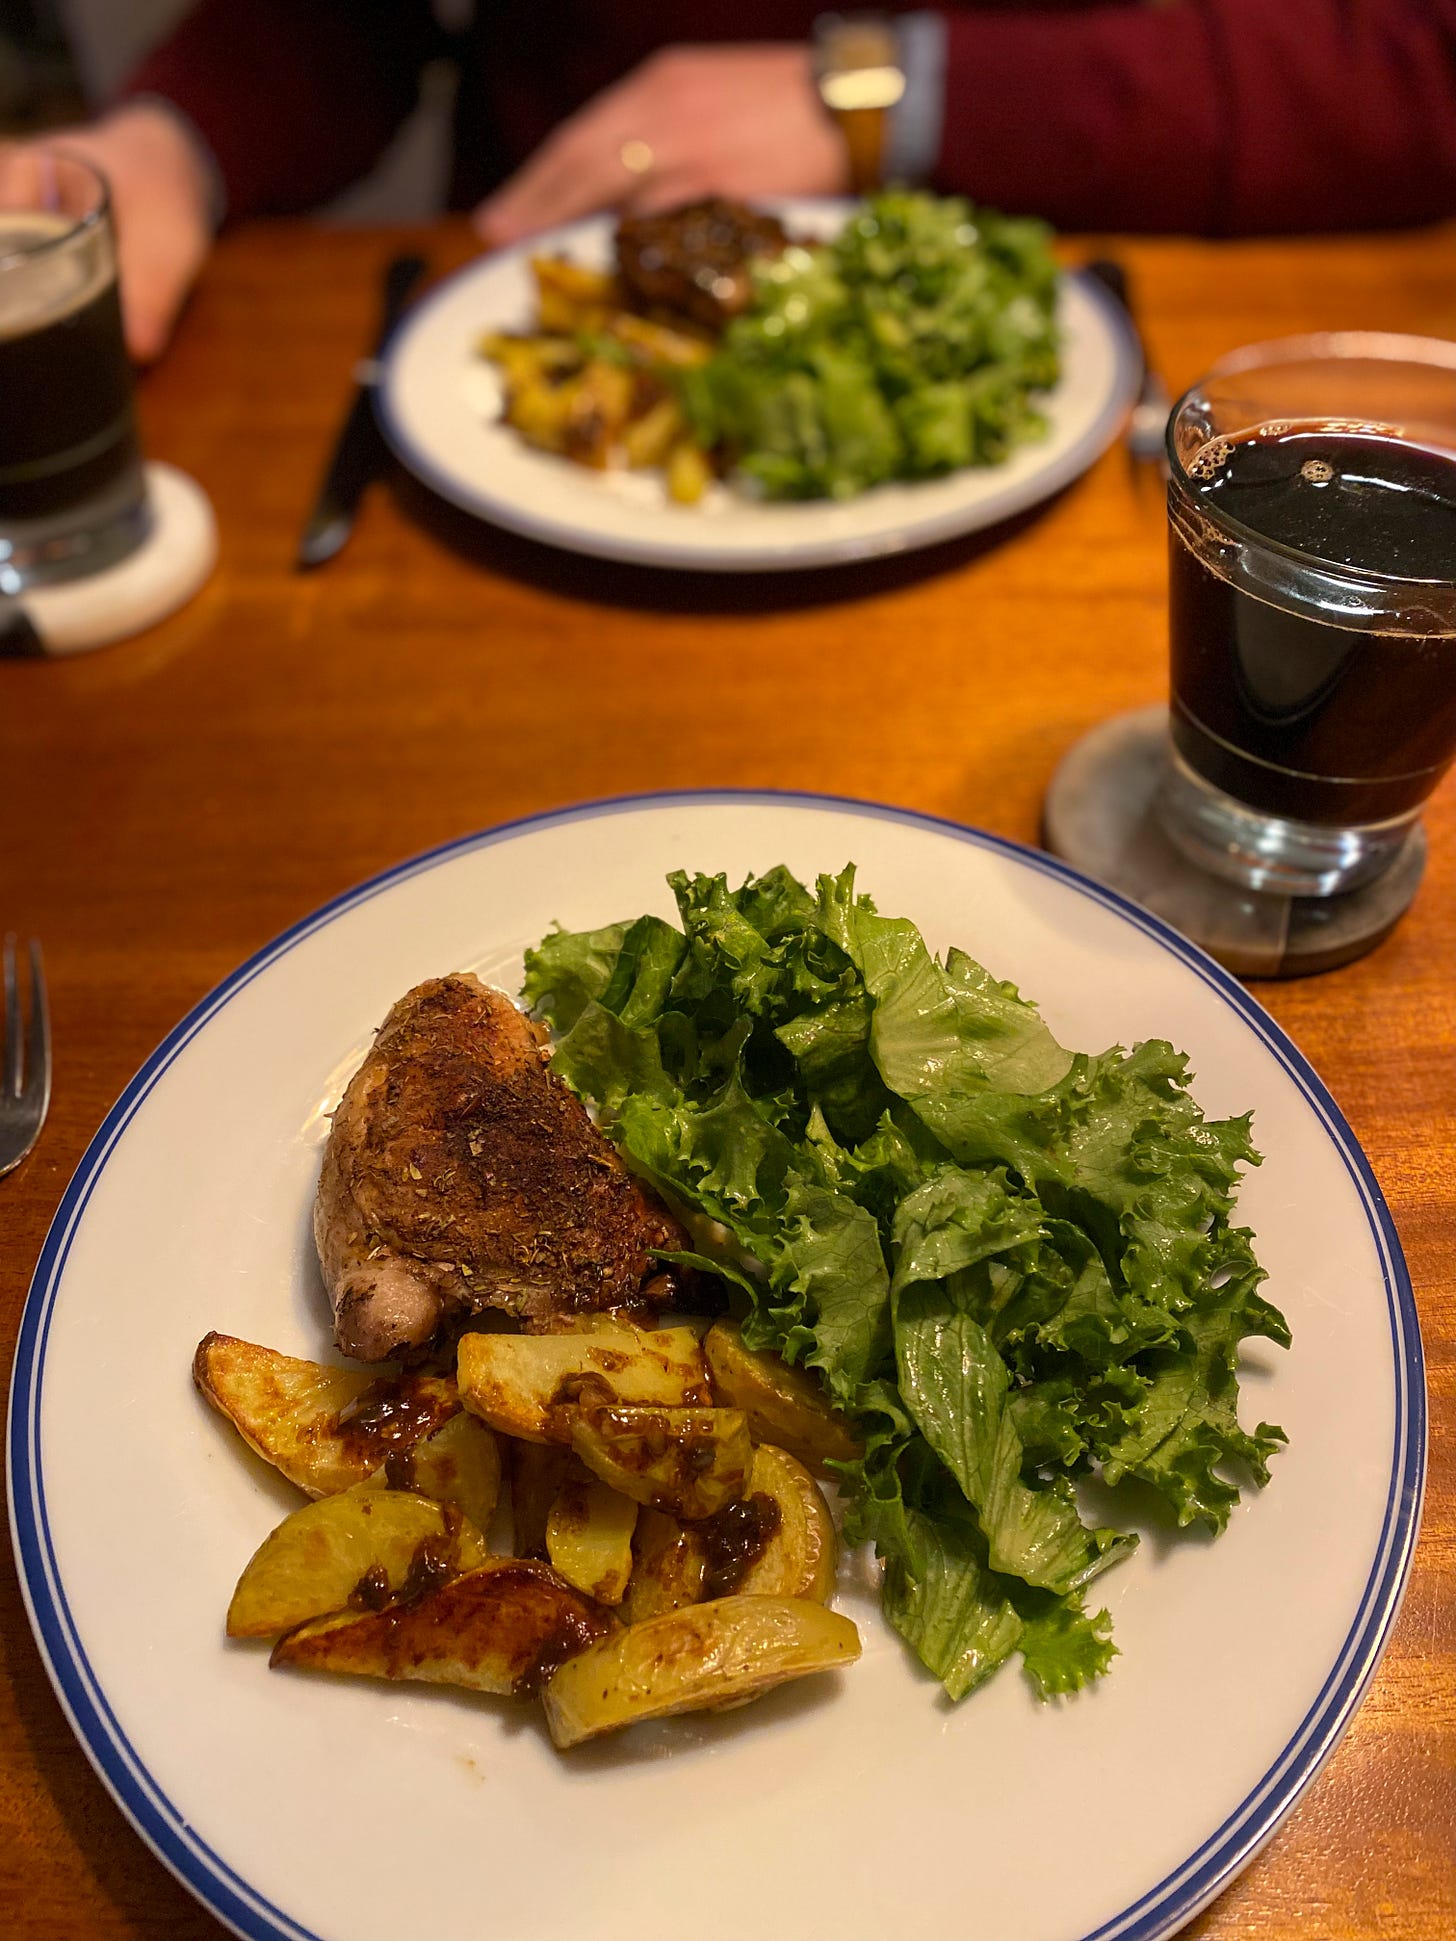 Two dinner plates across from each other, each filled with green salad, potato wedges with sauce drizzled on top, and a jerk chicken thigh with crispy-looking skin. Two glasses of dark beer rest on coasters near the tops of the plates.